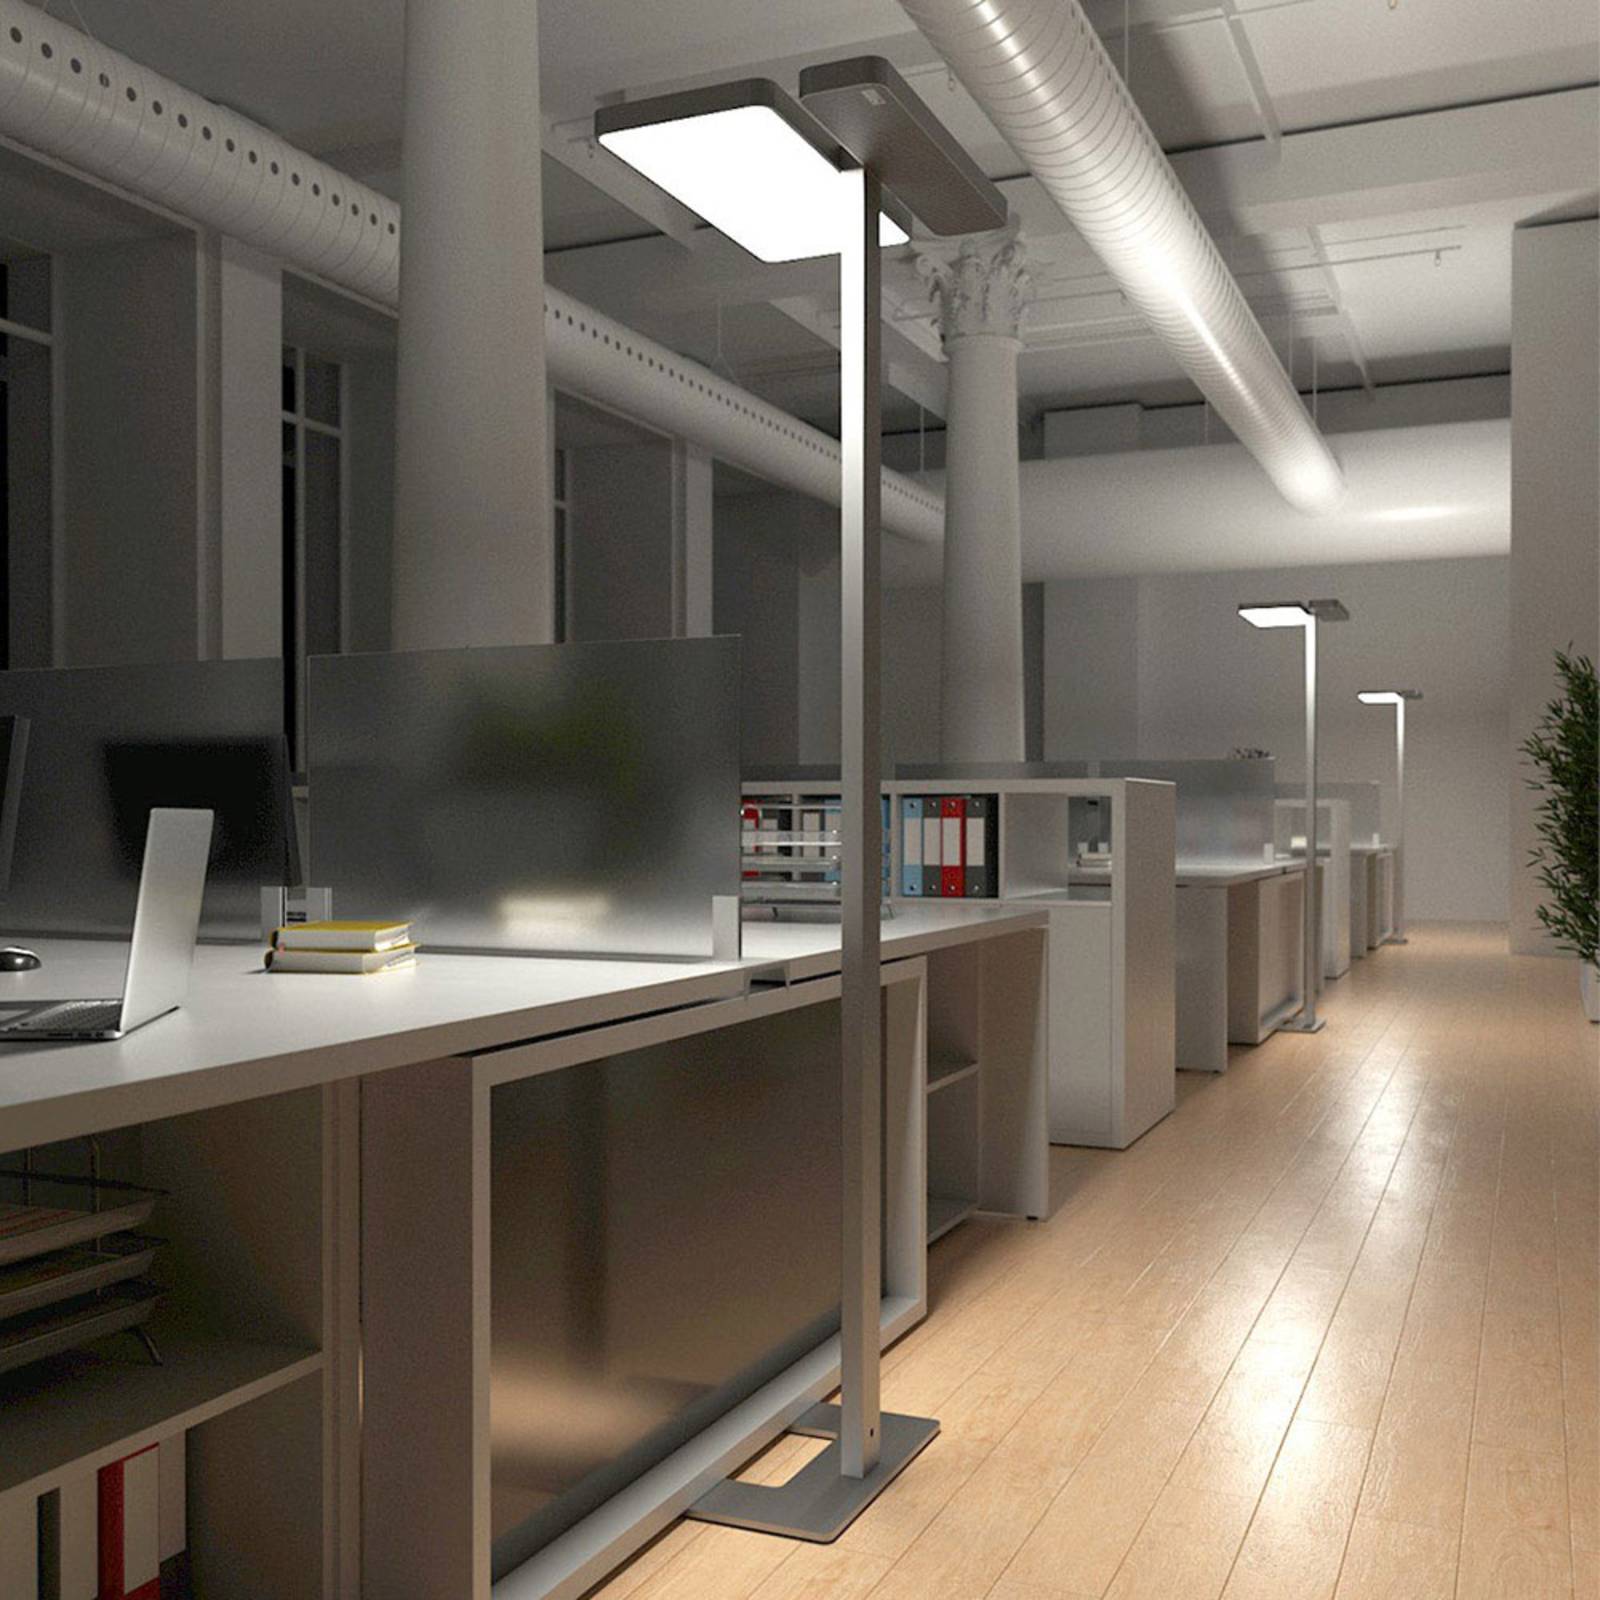 Office-LED-Stehlampe Aila, silber, Tageslichtsensor von Arcchio